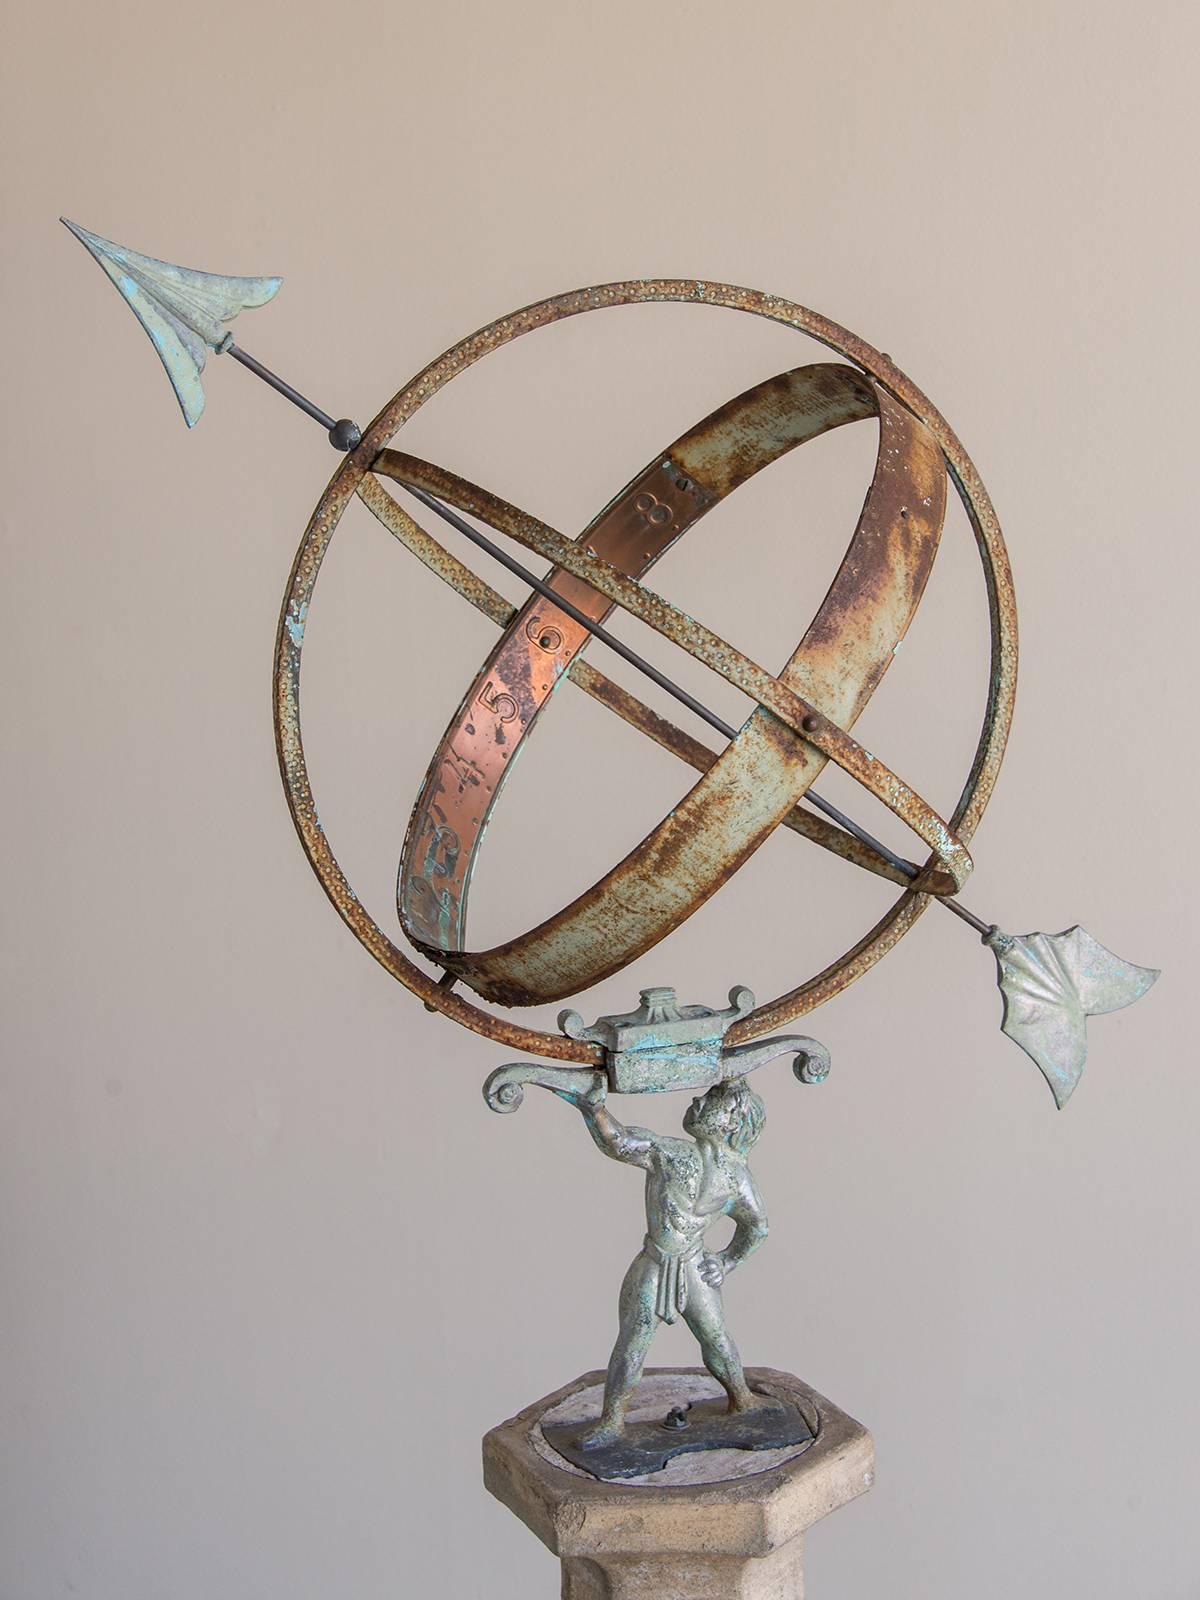 This charming French garden ornament features a tapered stone column with each of the six sides embellished with a climbing vine with well modeled leaves. The hexagon column supports a figure of a man holding aloft a large copper armillary sphere